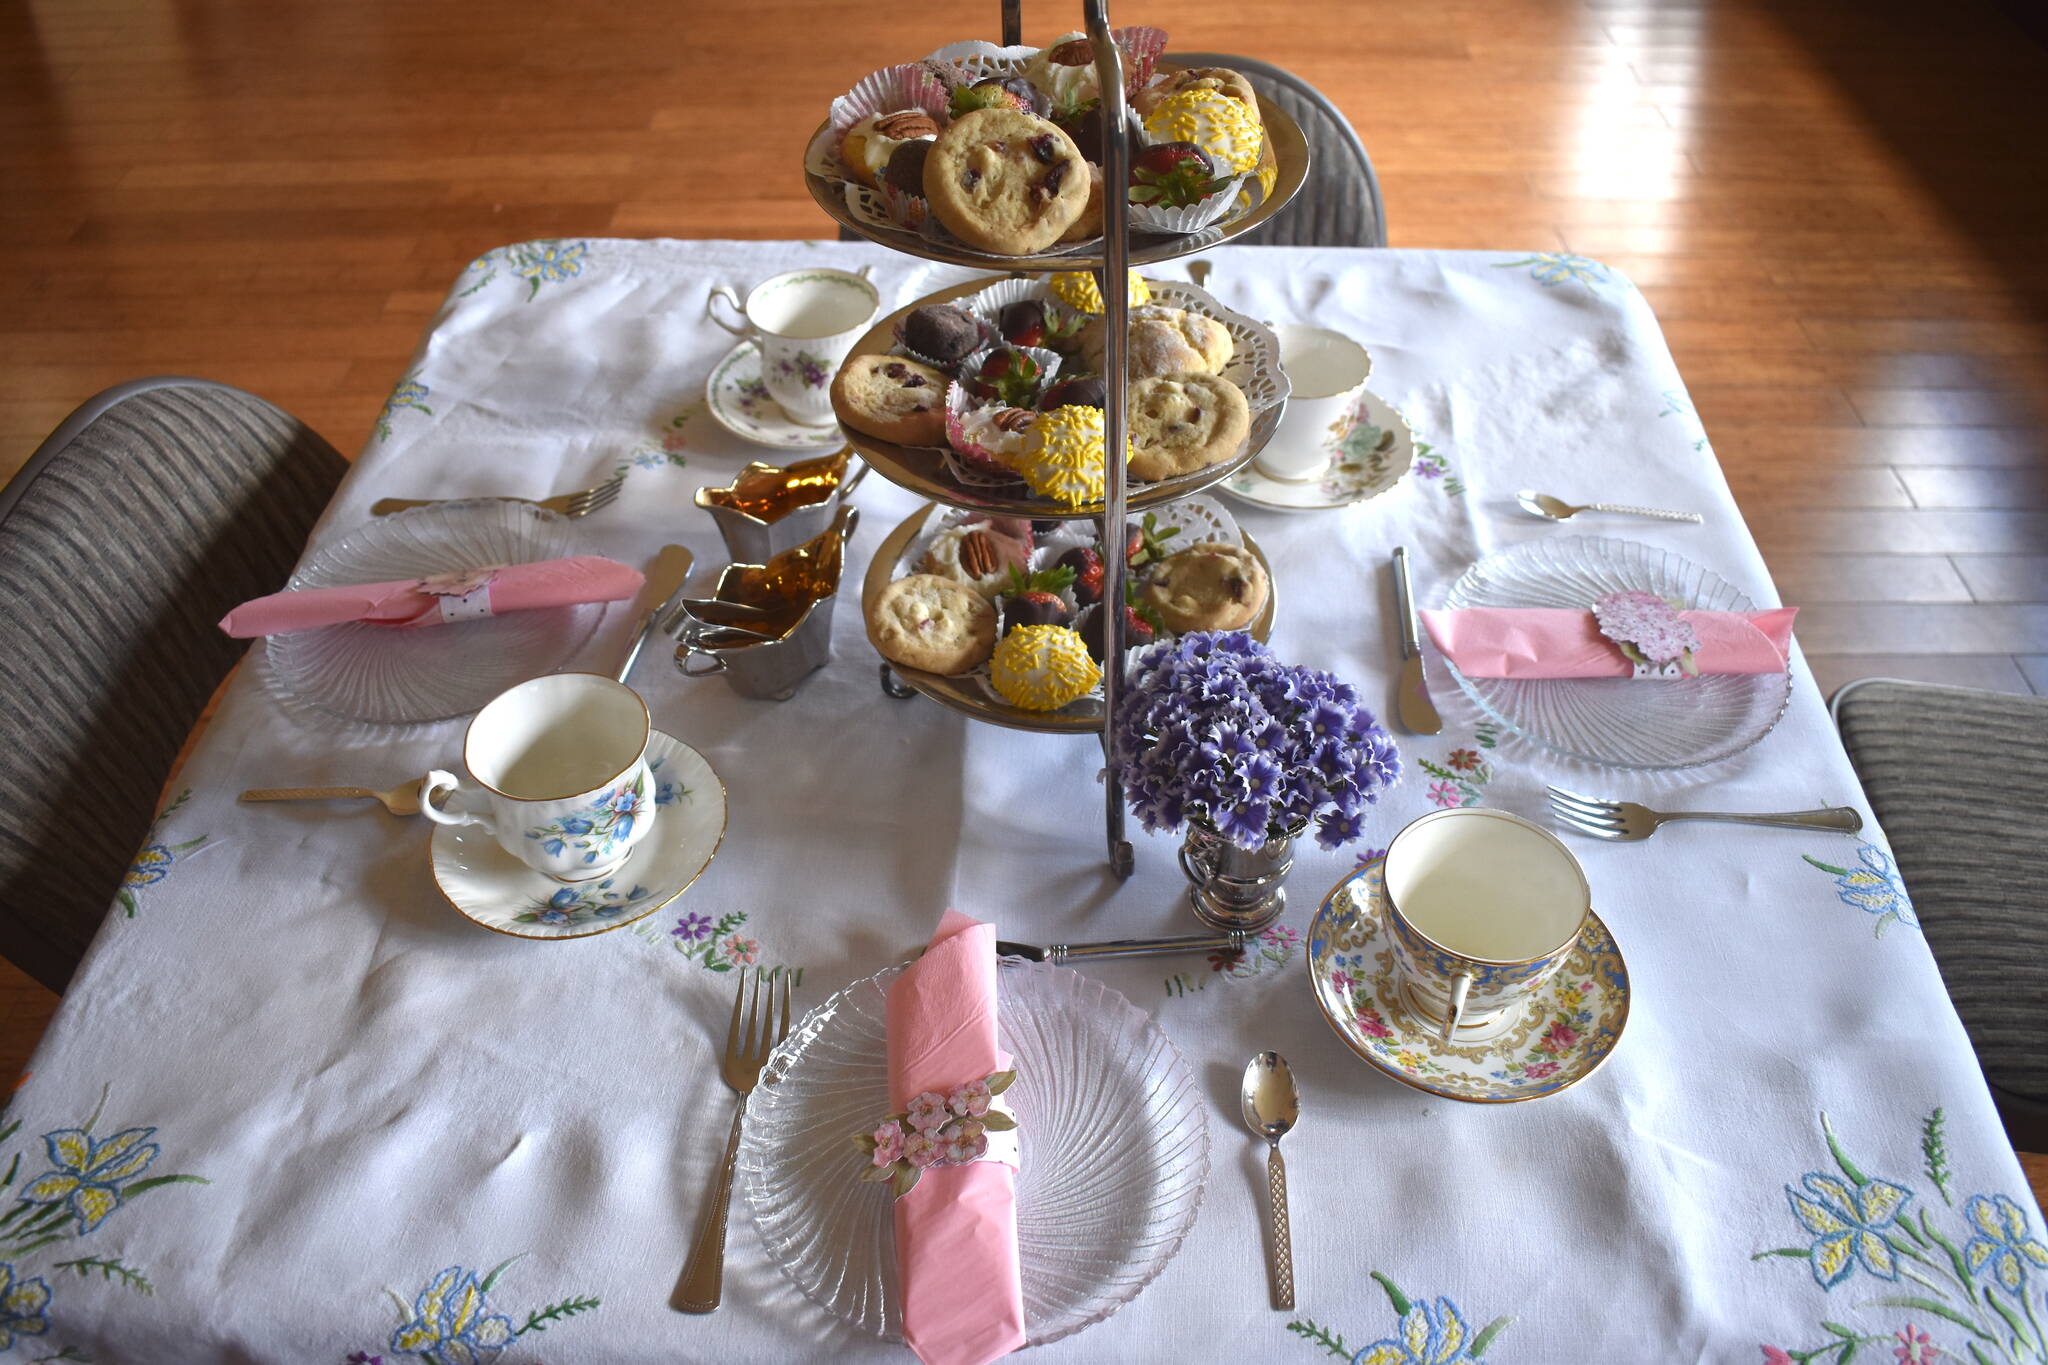 Matthew N. Wells / The Daily World
This is a preview of some of the sweet items to expect at the Victorian Tea at St. Andrew’s Episcopal Church. The event runs from 2 to 4 p.m. on Saturday. And yes, those tea cups will be filled with smooth hot tea that’s delicious even for non-tea drinkers.